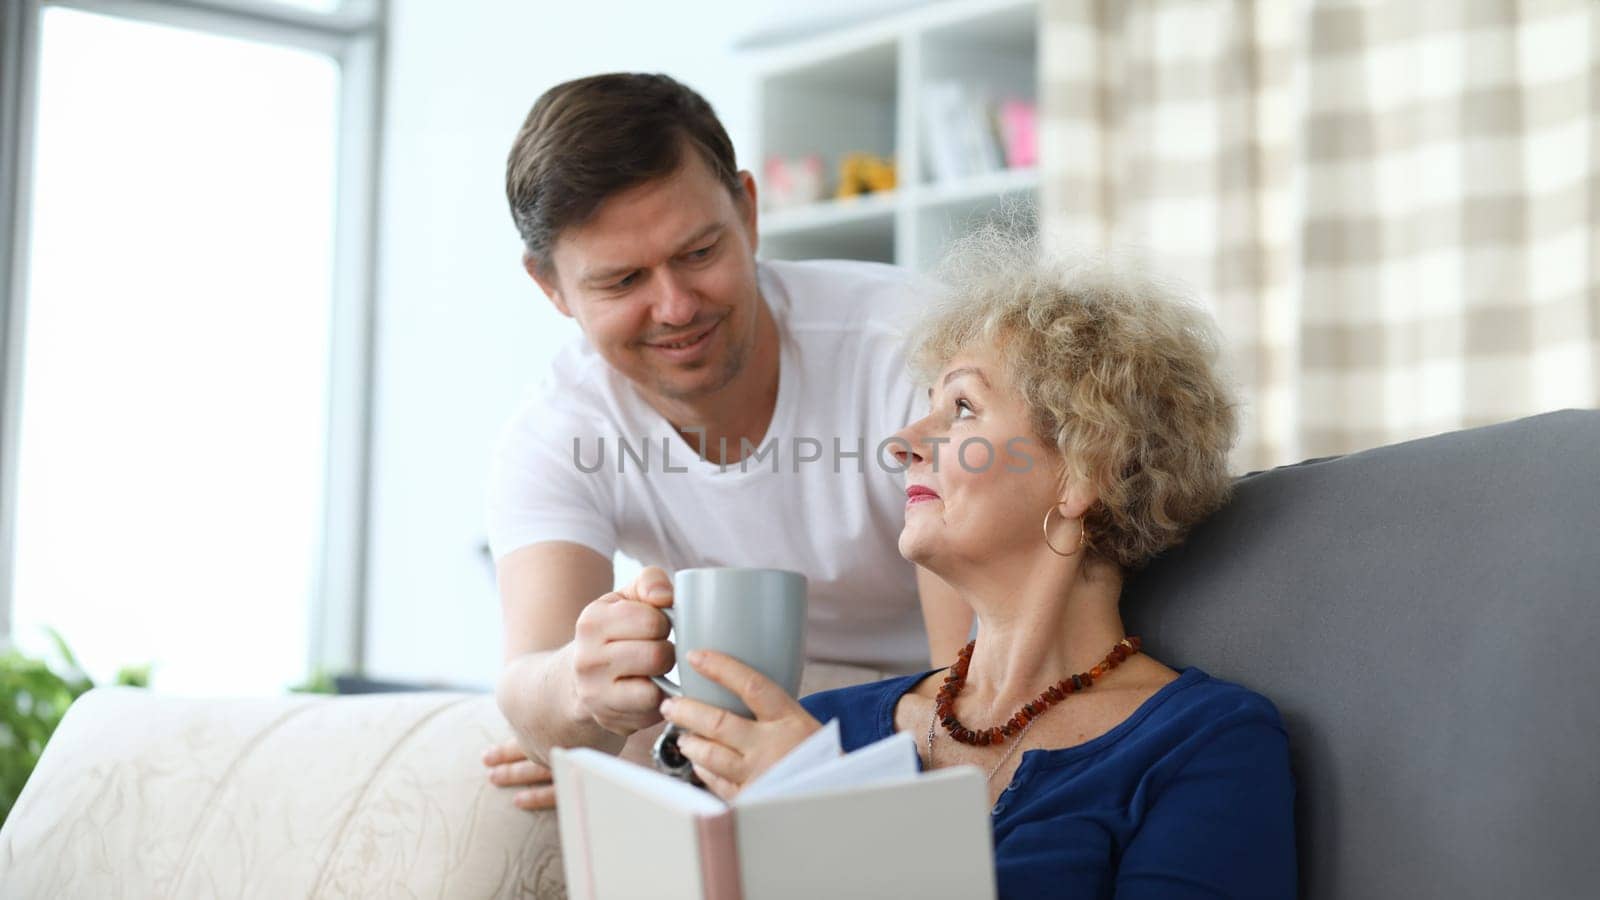 Adult son serves cup tea to an elderly mother. Relatives help each other during self-isolation. Time for reading fiction and books on self-development. Son pays attention to an elderly mother